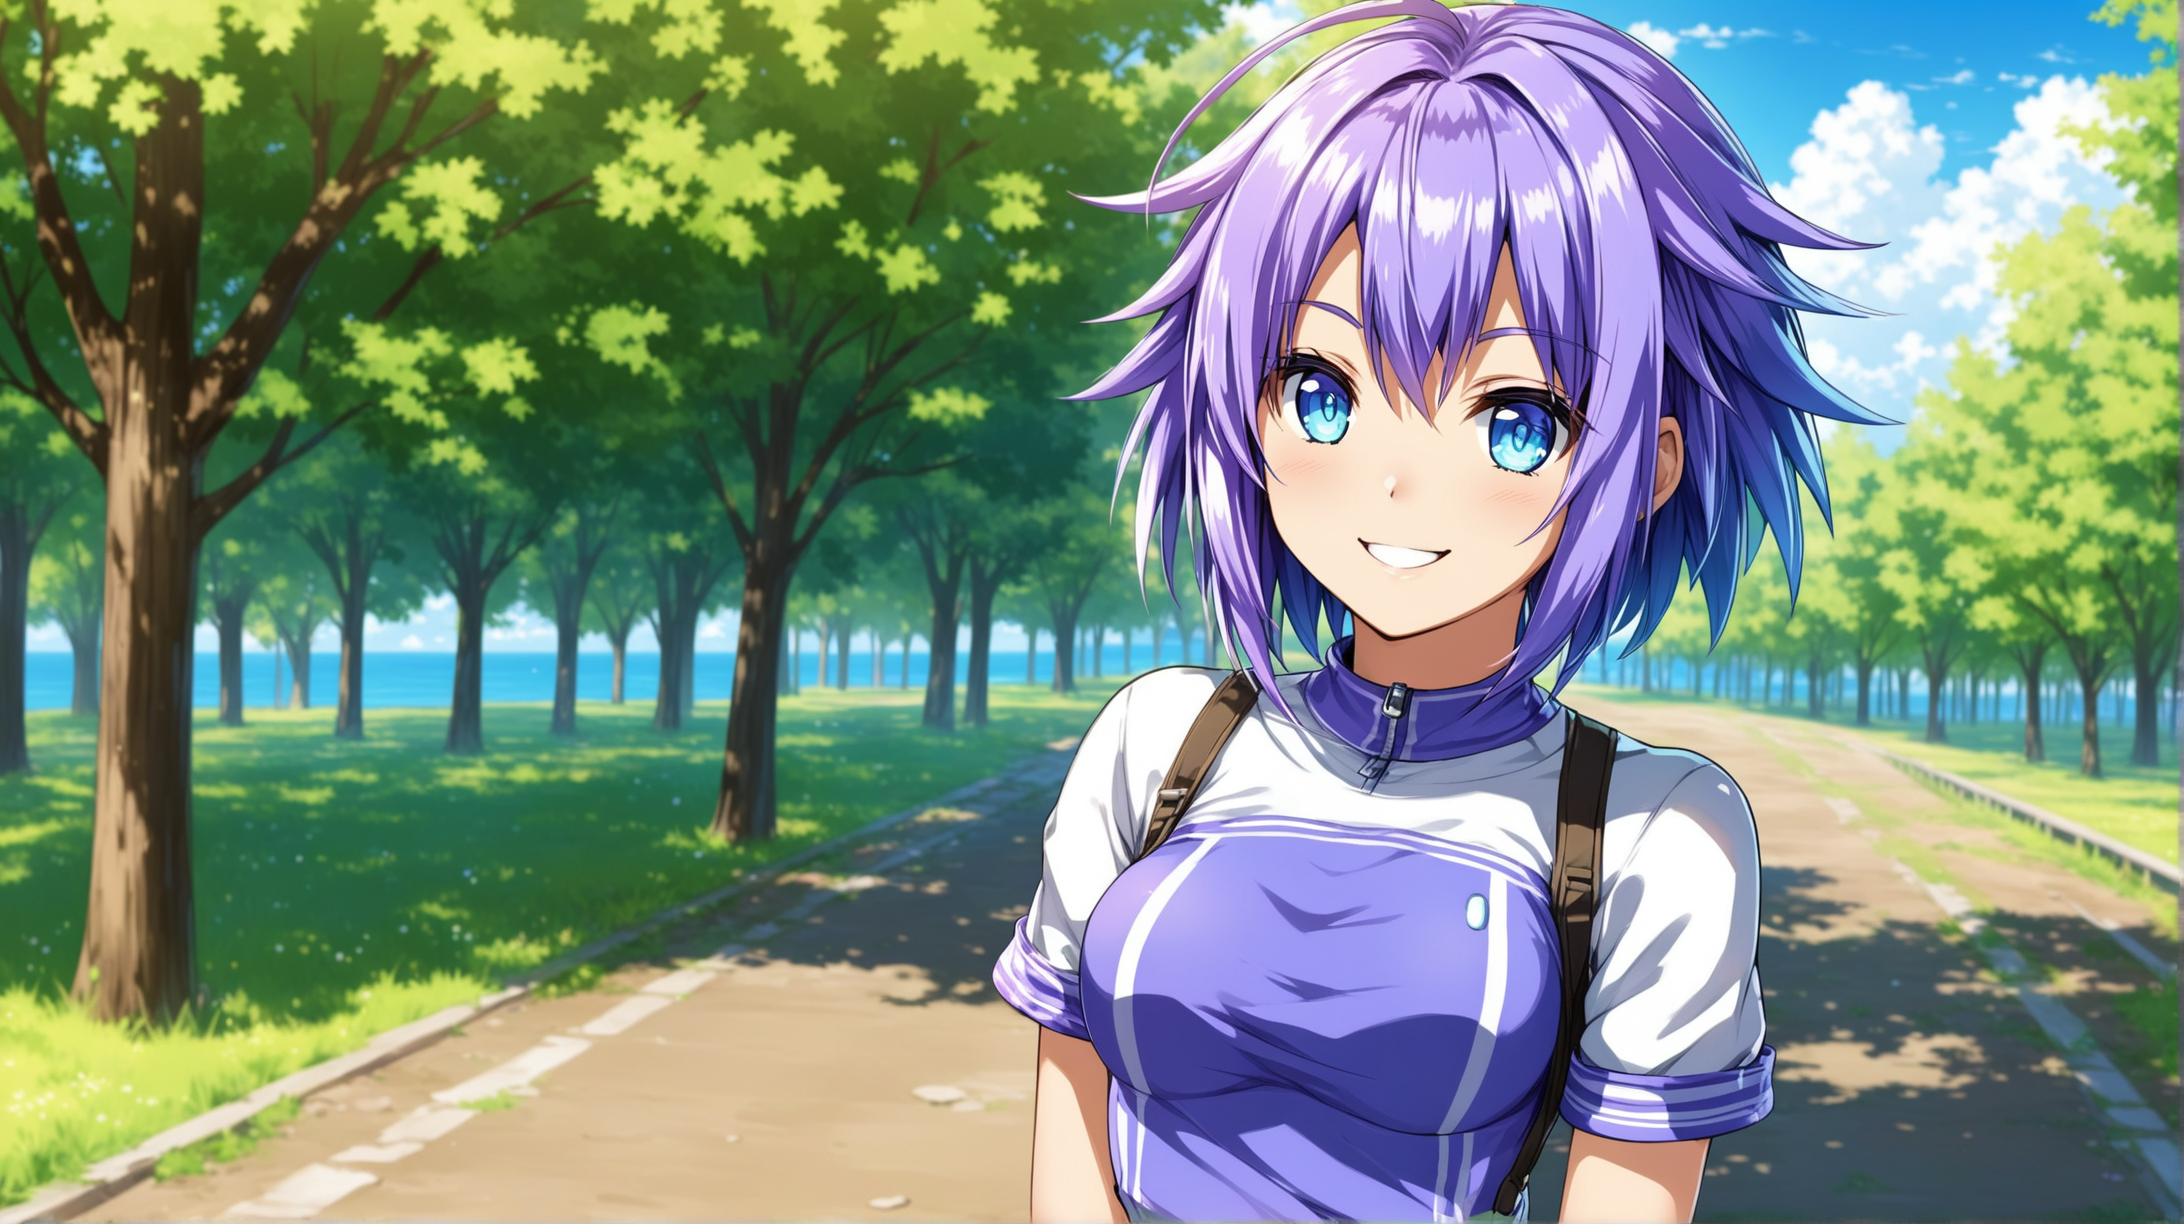 Draw the Hyperdimension Neptunia character Neptune, with short hair, high quality, outdoors, casual pose, an outfit and setting inspired from the Fallout game series, smiling at the viewer